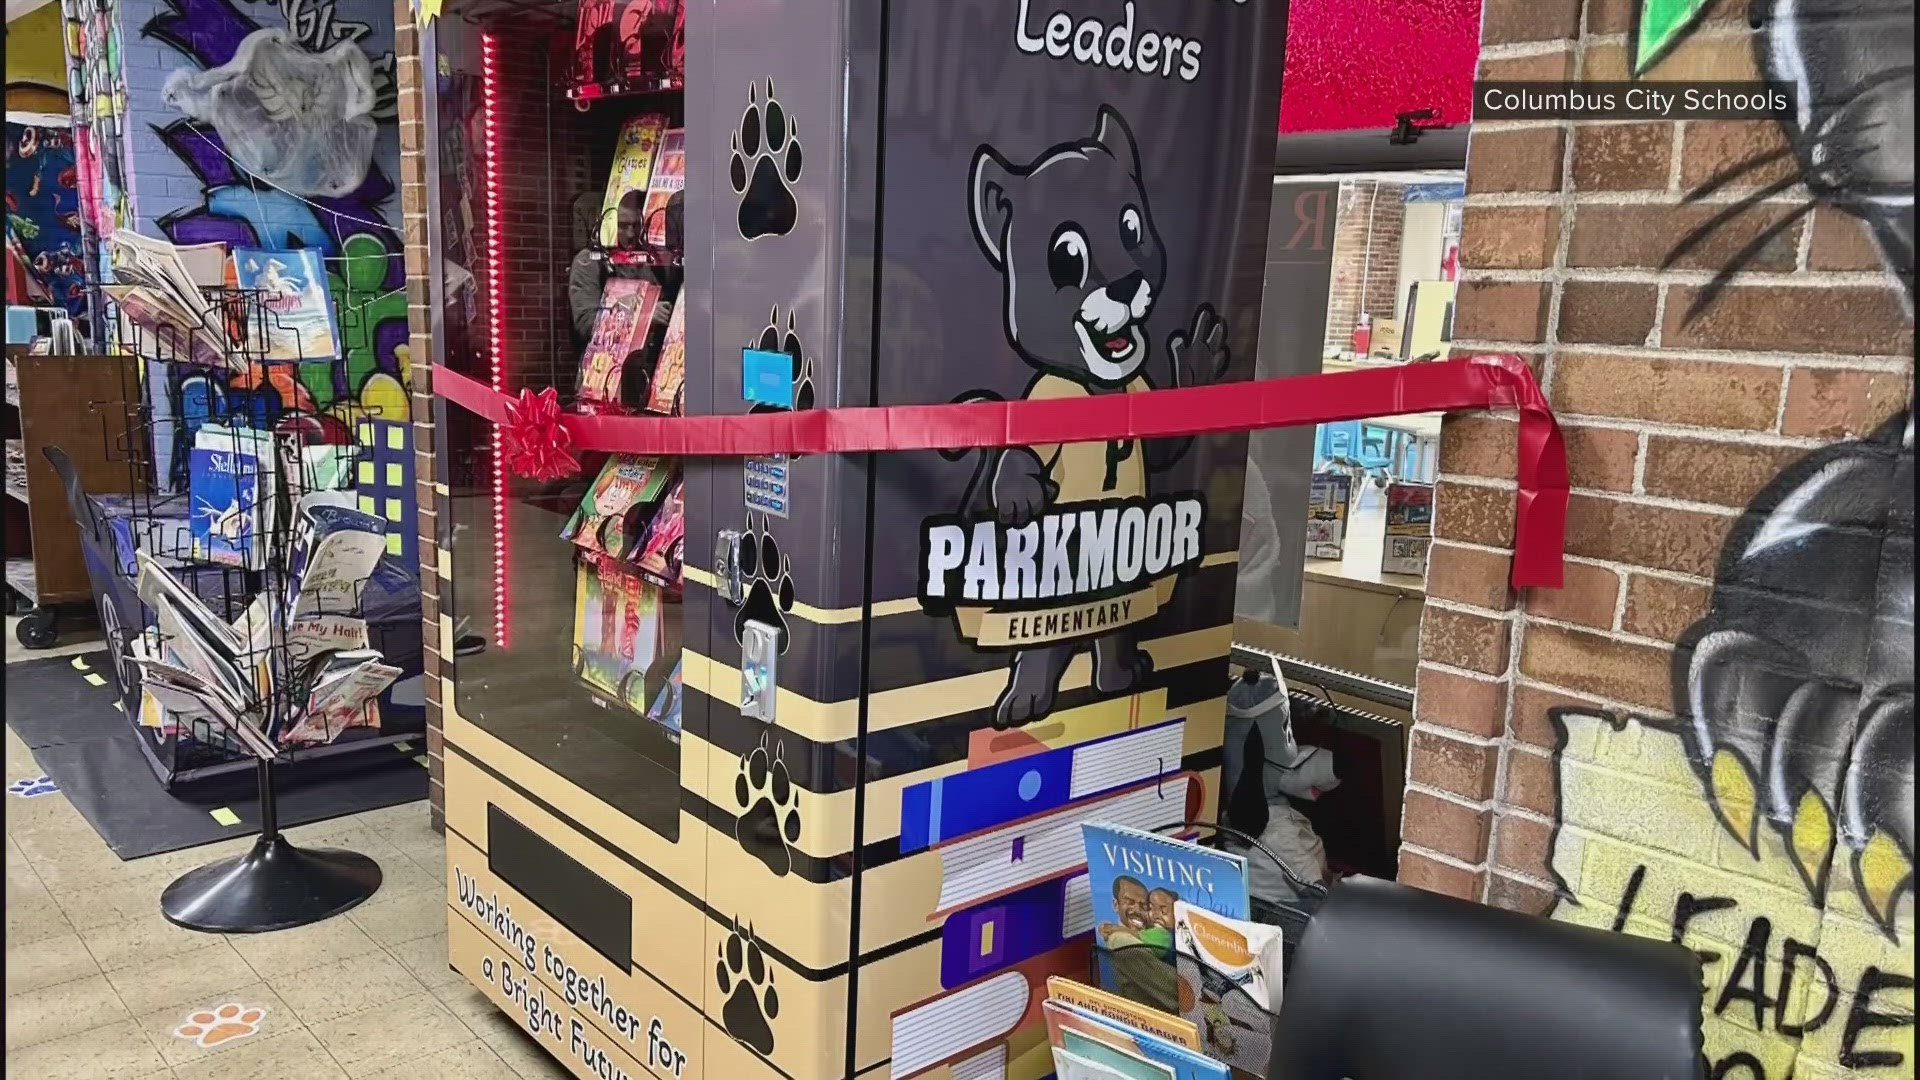 Parkmoor Elementary School in Columbus installed a book vending machine for kids to use as part of a reward program.